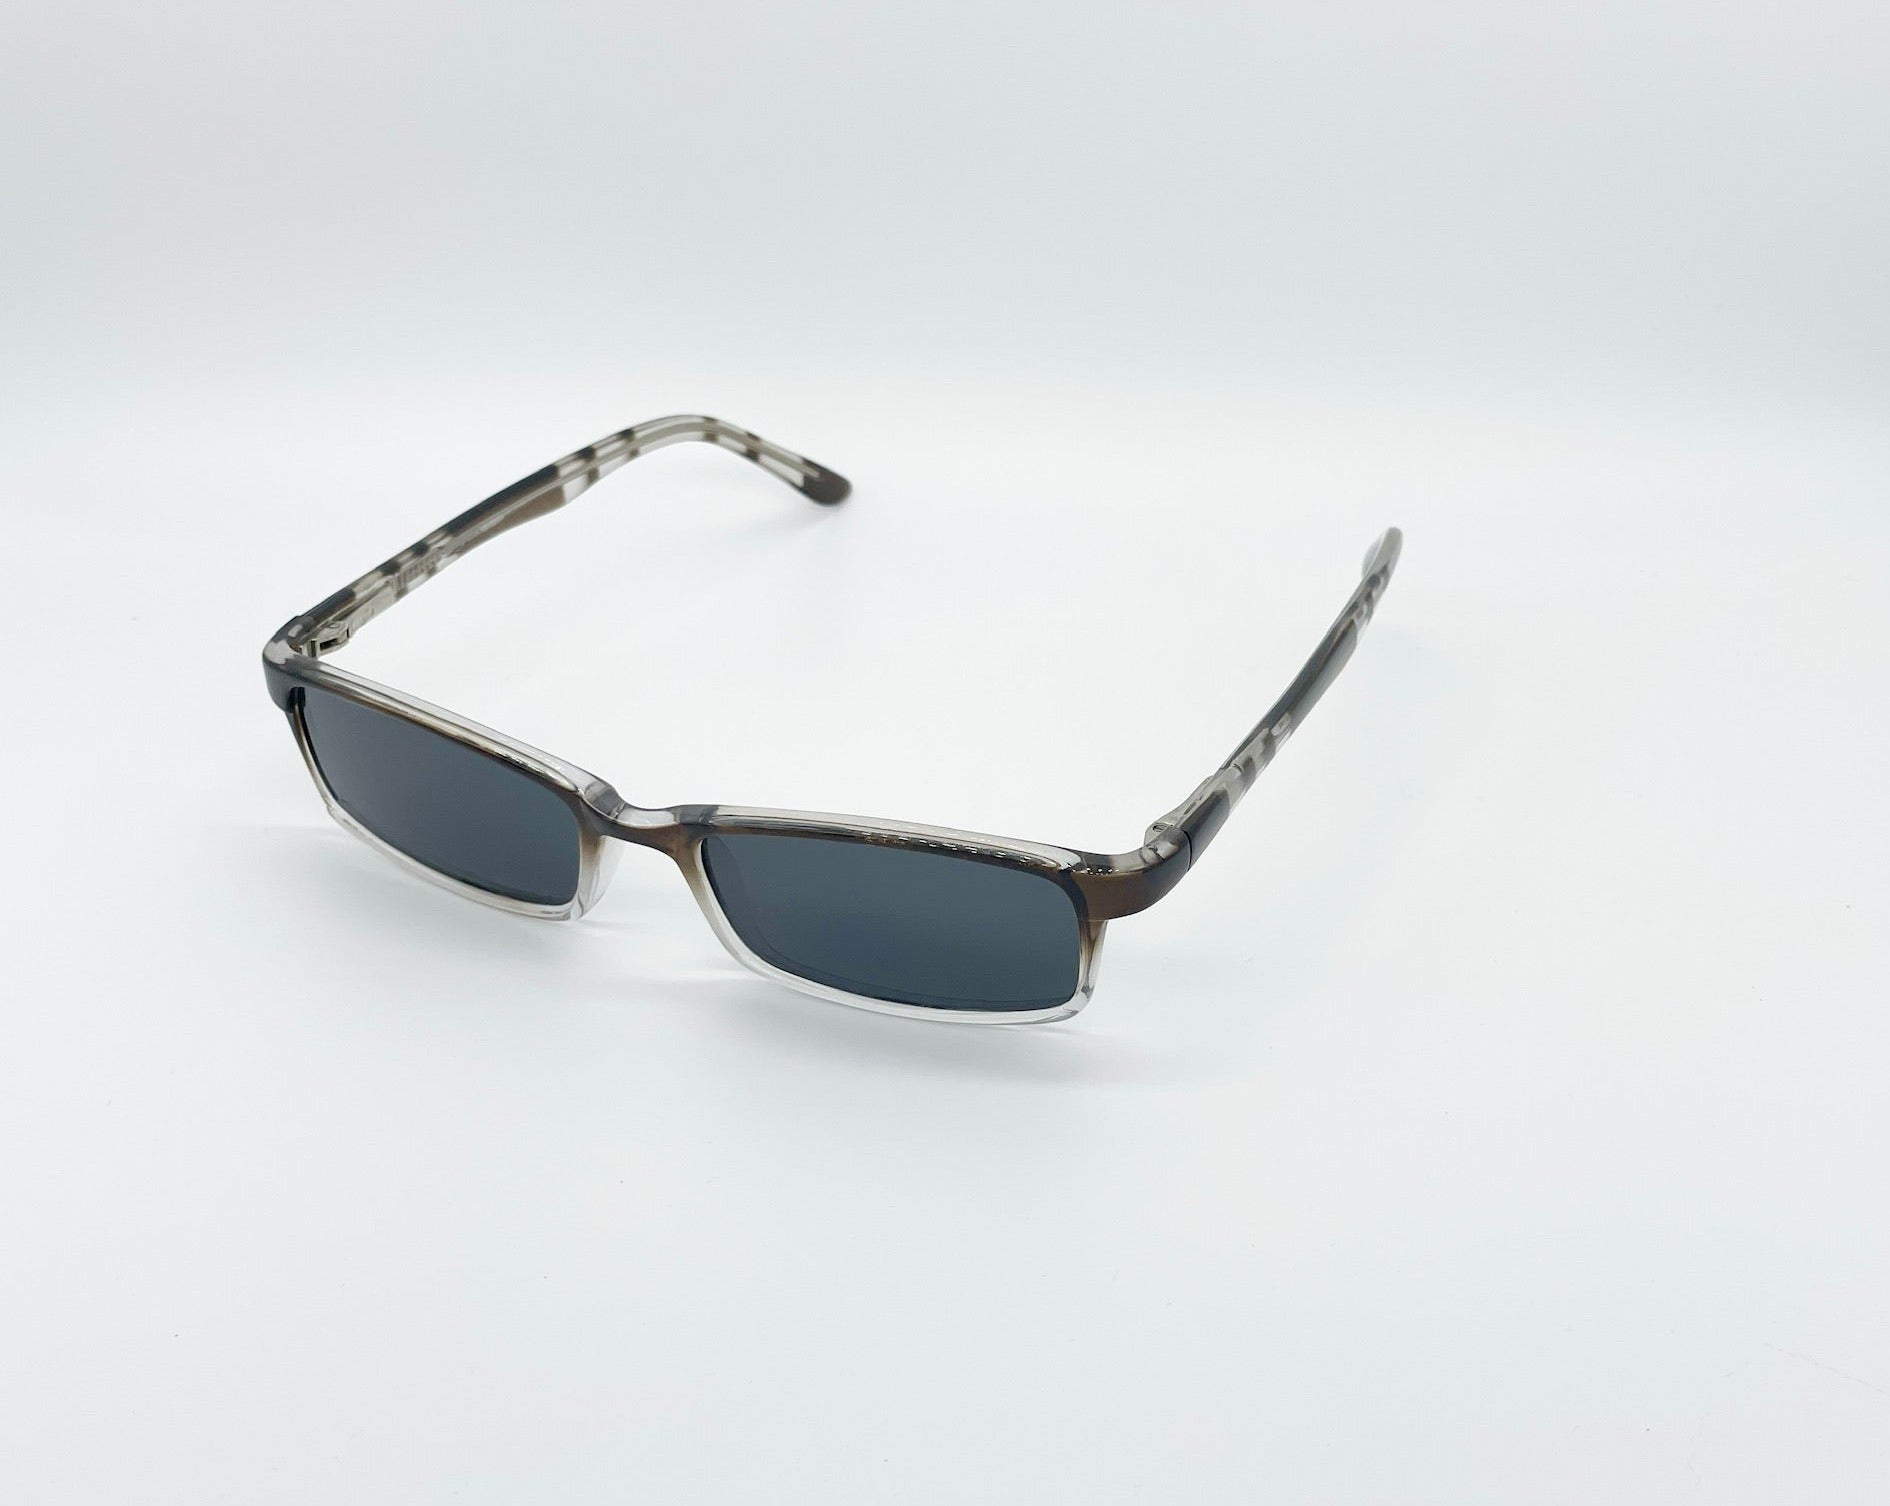 Lounging In The Perfect Sunny Spot - SPEX Eyewear Inc.